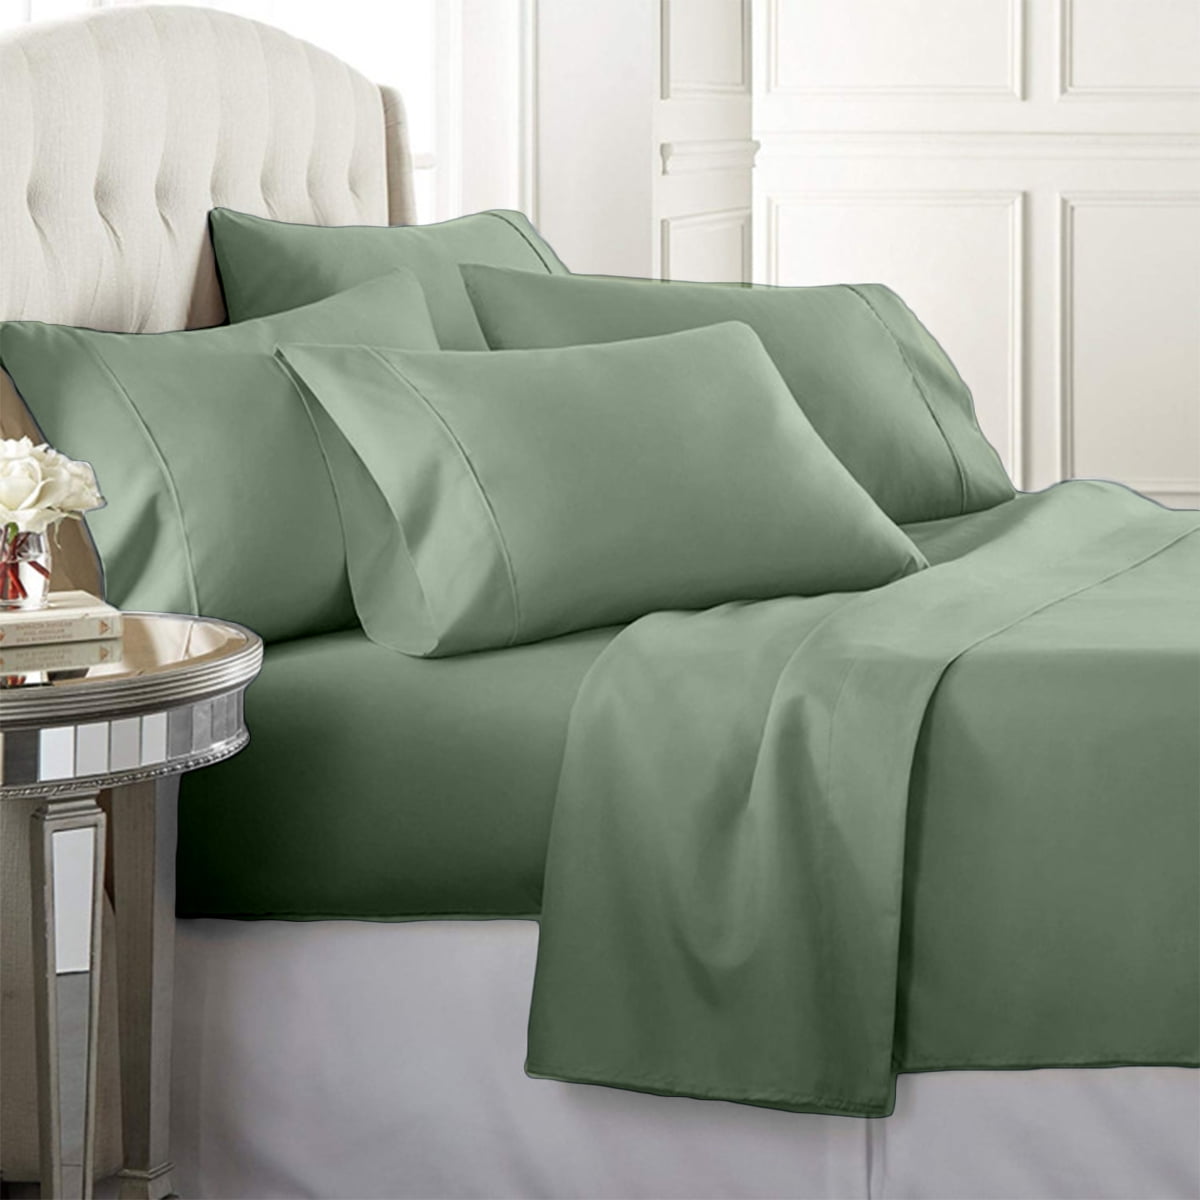 SAGE TRAVEL PREMIUM BED SHEET COMPLETE SET FLAT FITTED PILLOCASES 3/4PC NEW 